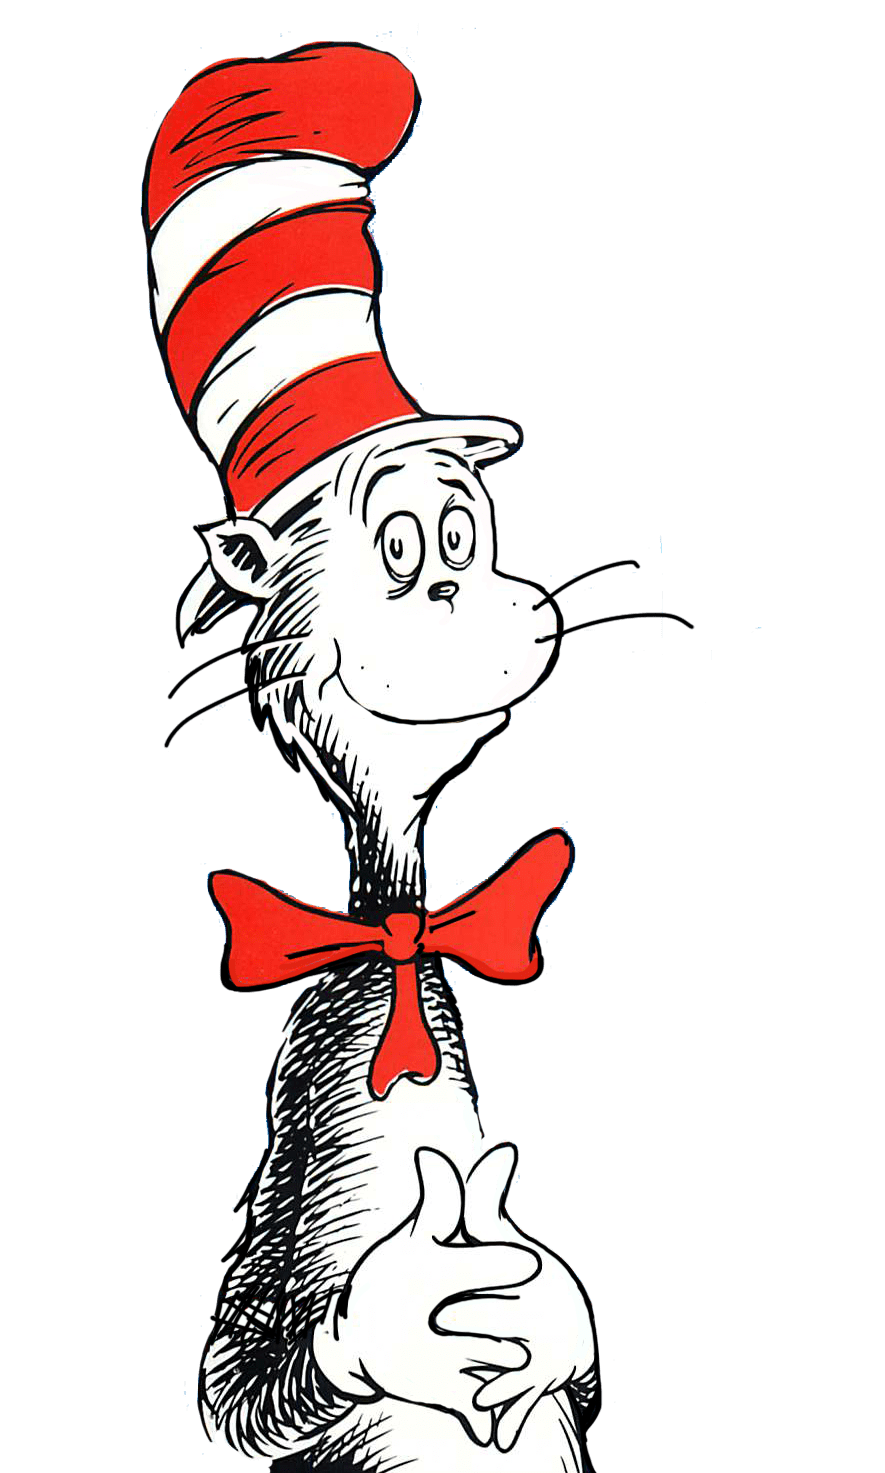 Dr. Seuss Characters #1412102